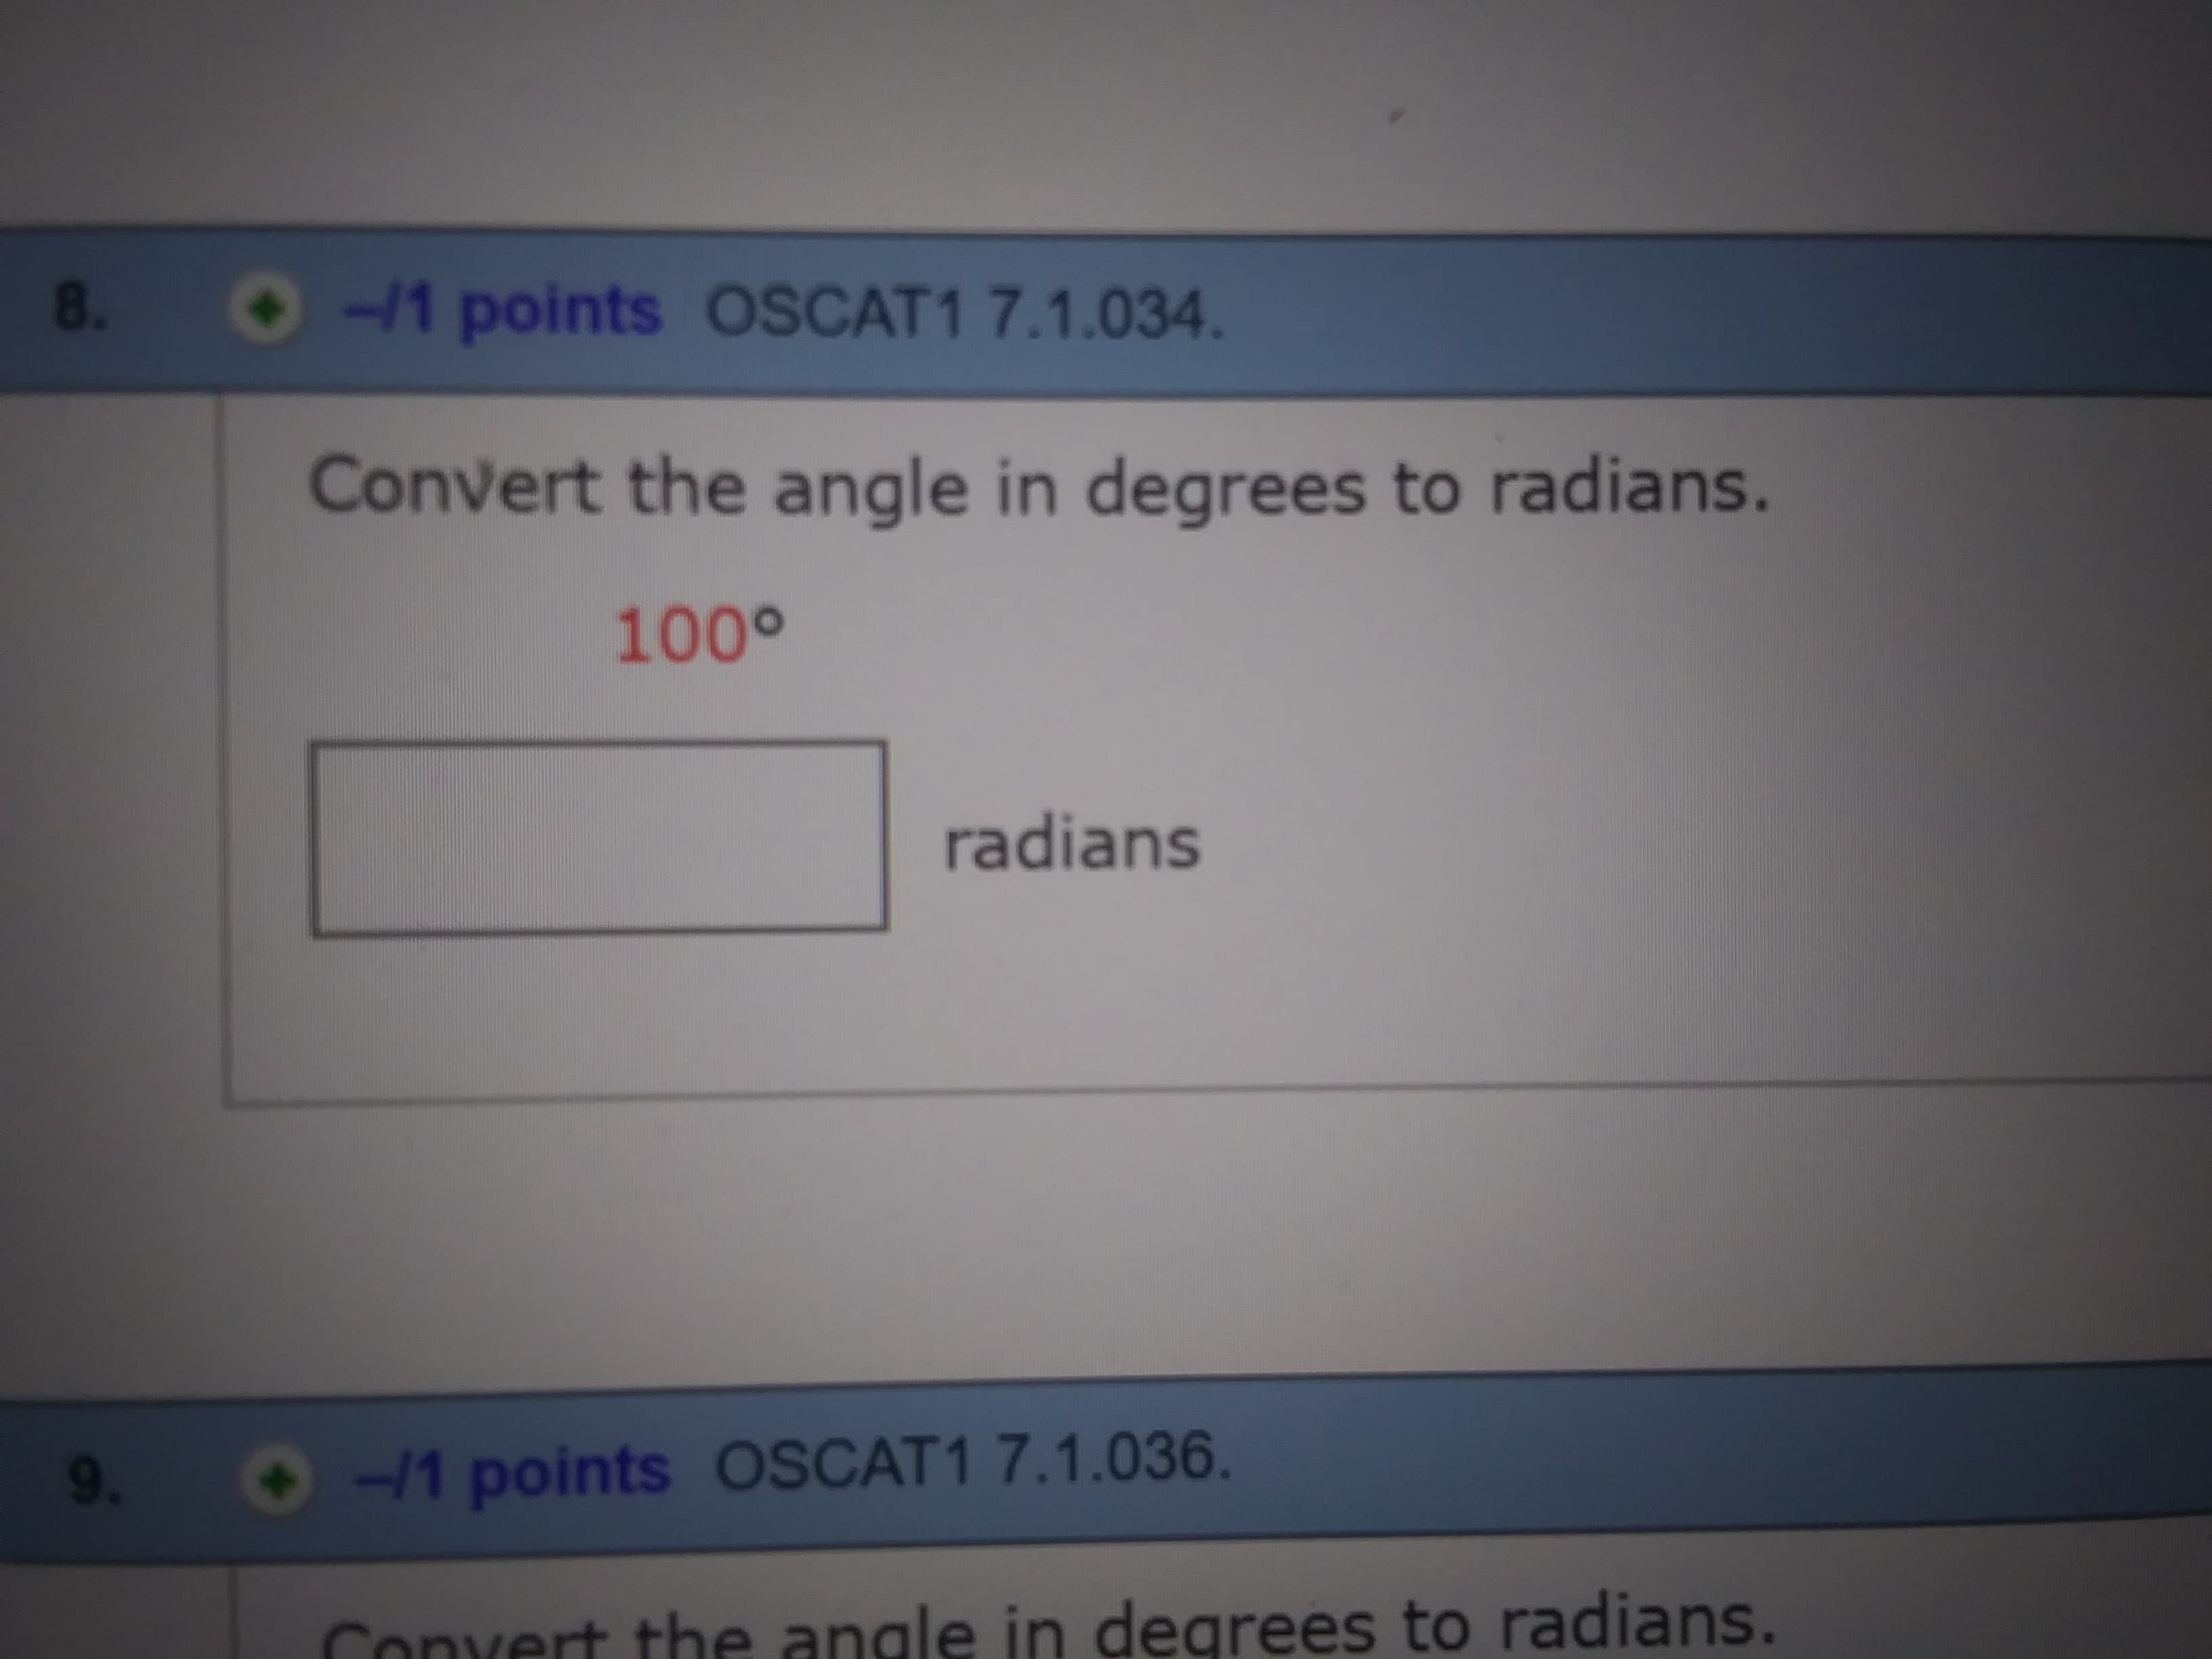 8.
-/1 points OSCAT1 7.1.034.
Convert the angle in degrees to radians.
100°
radians
9 1 points OSCAT1 7.1.036.
Convert the anale in degrees to radians.
